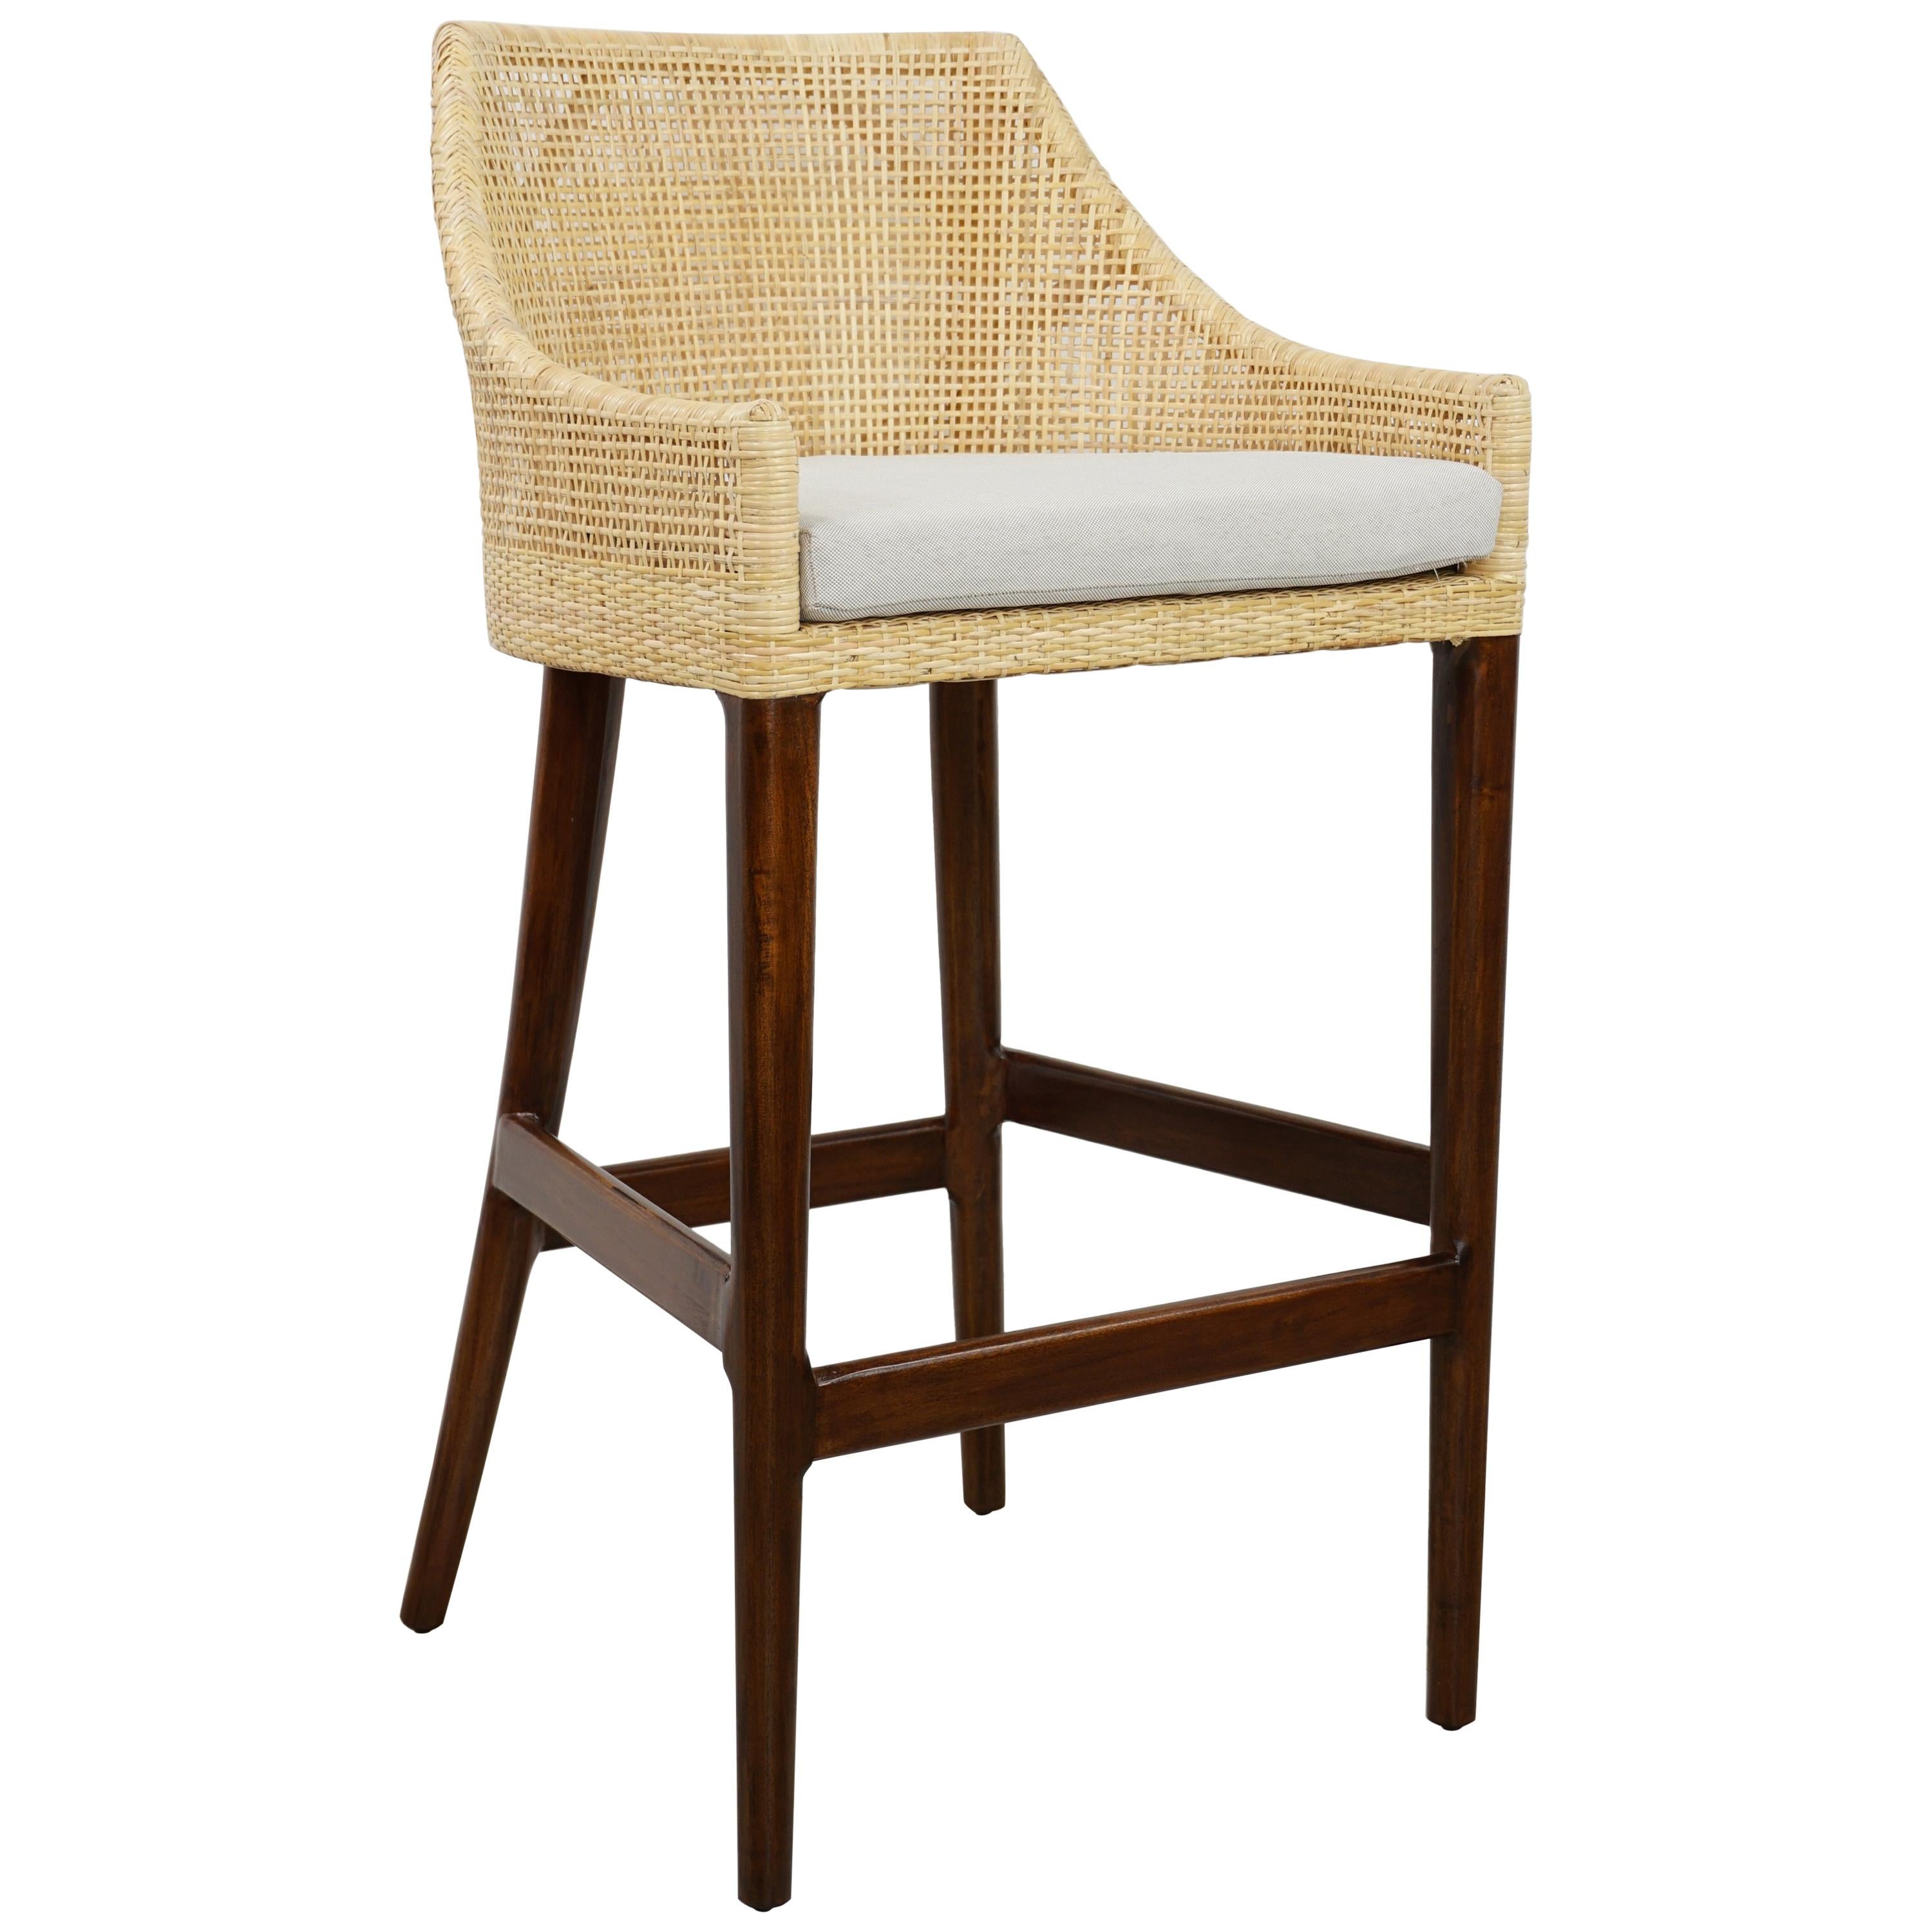 Rattan Bar Stool For At 1stdibs, Wooden Bar Stools With Rattan Seats